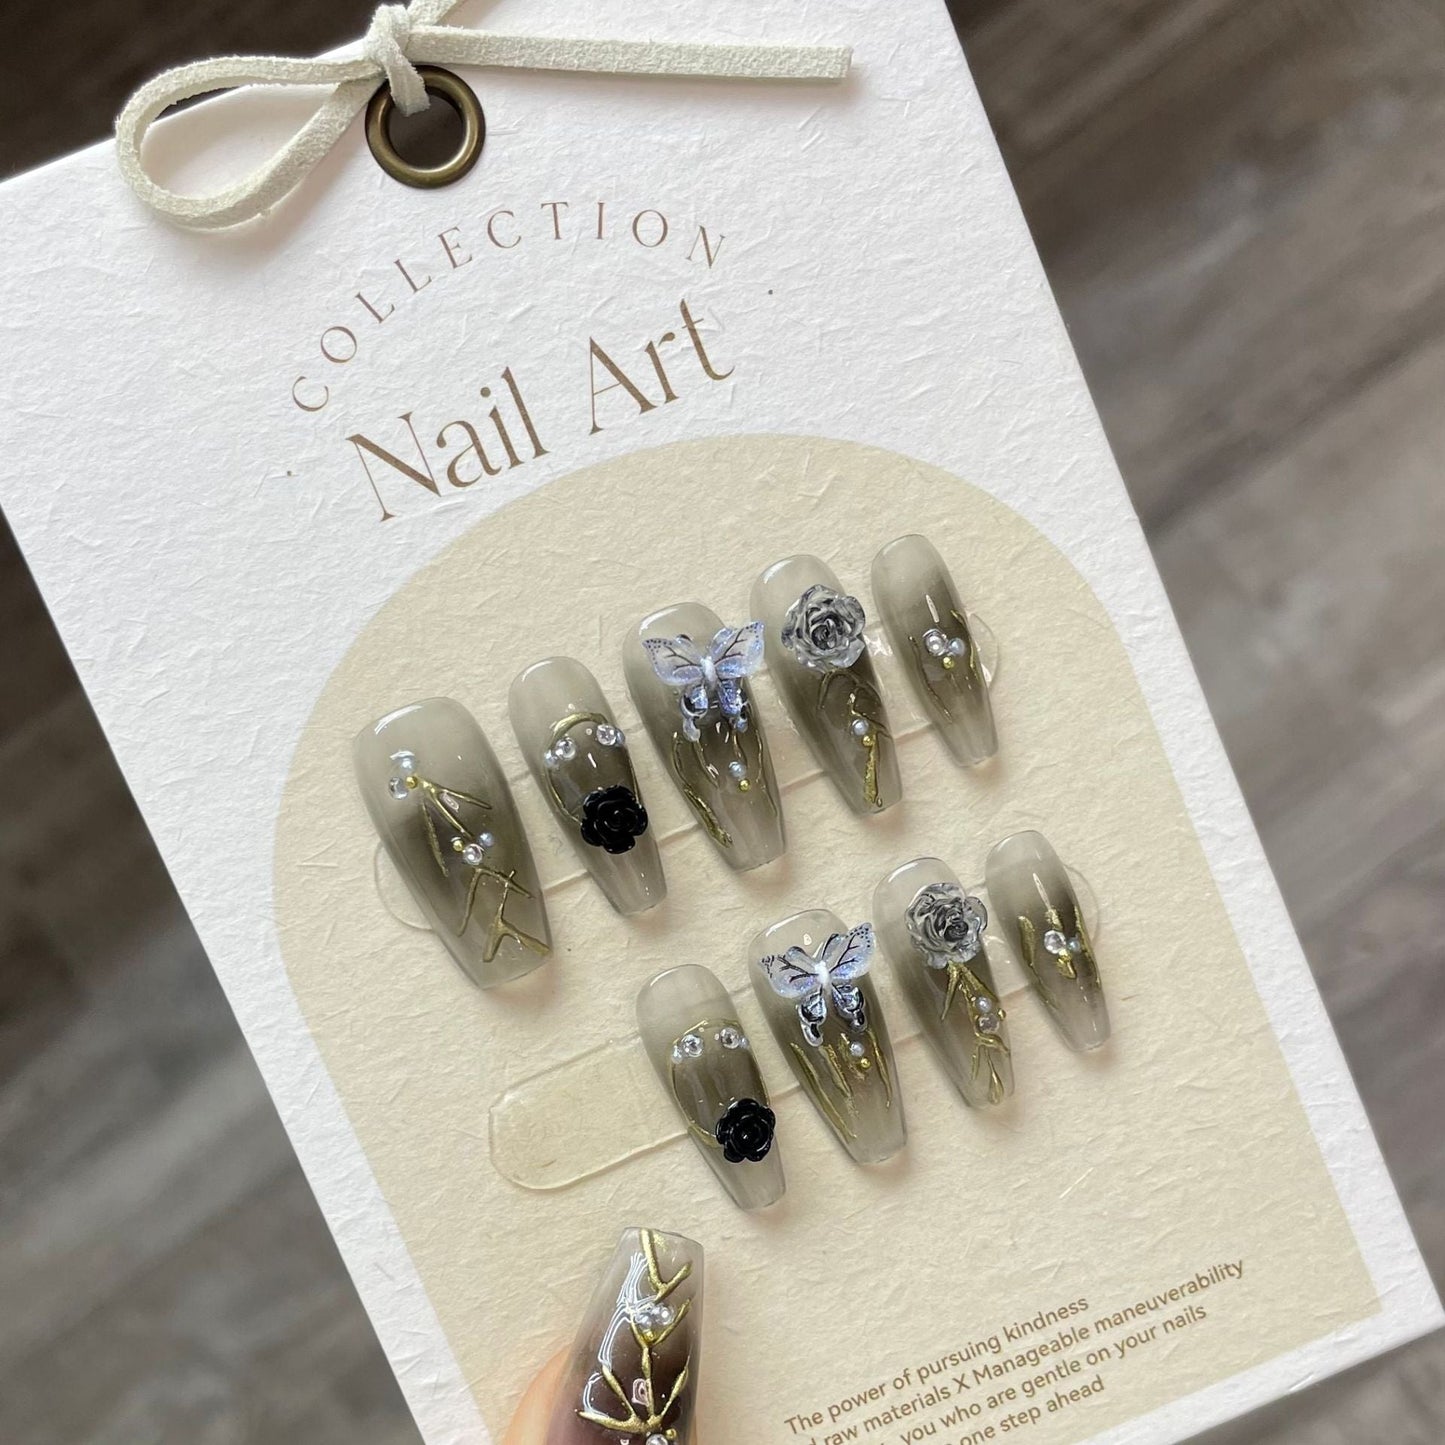 853 Butterfly flower style press on nails 100% handmade false nails gray